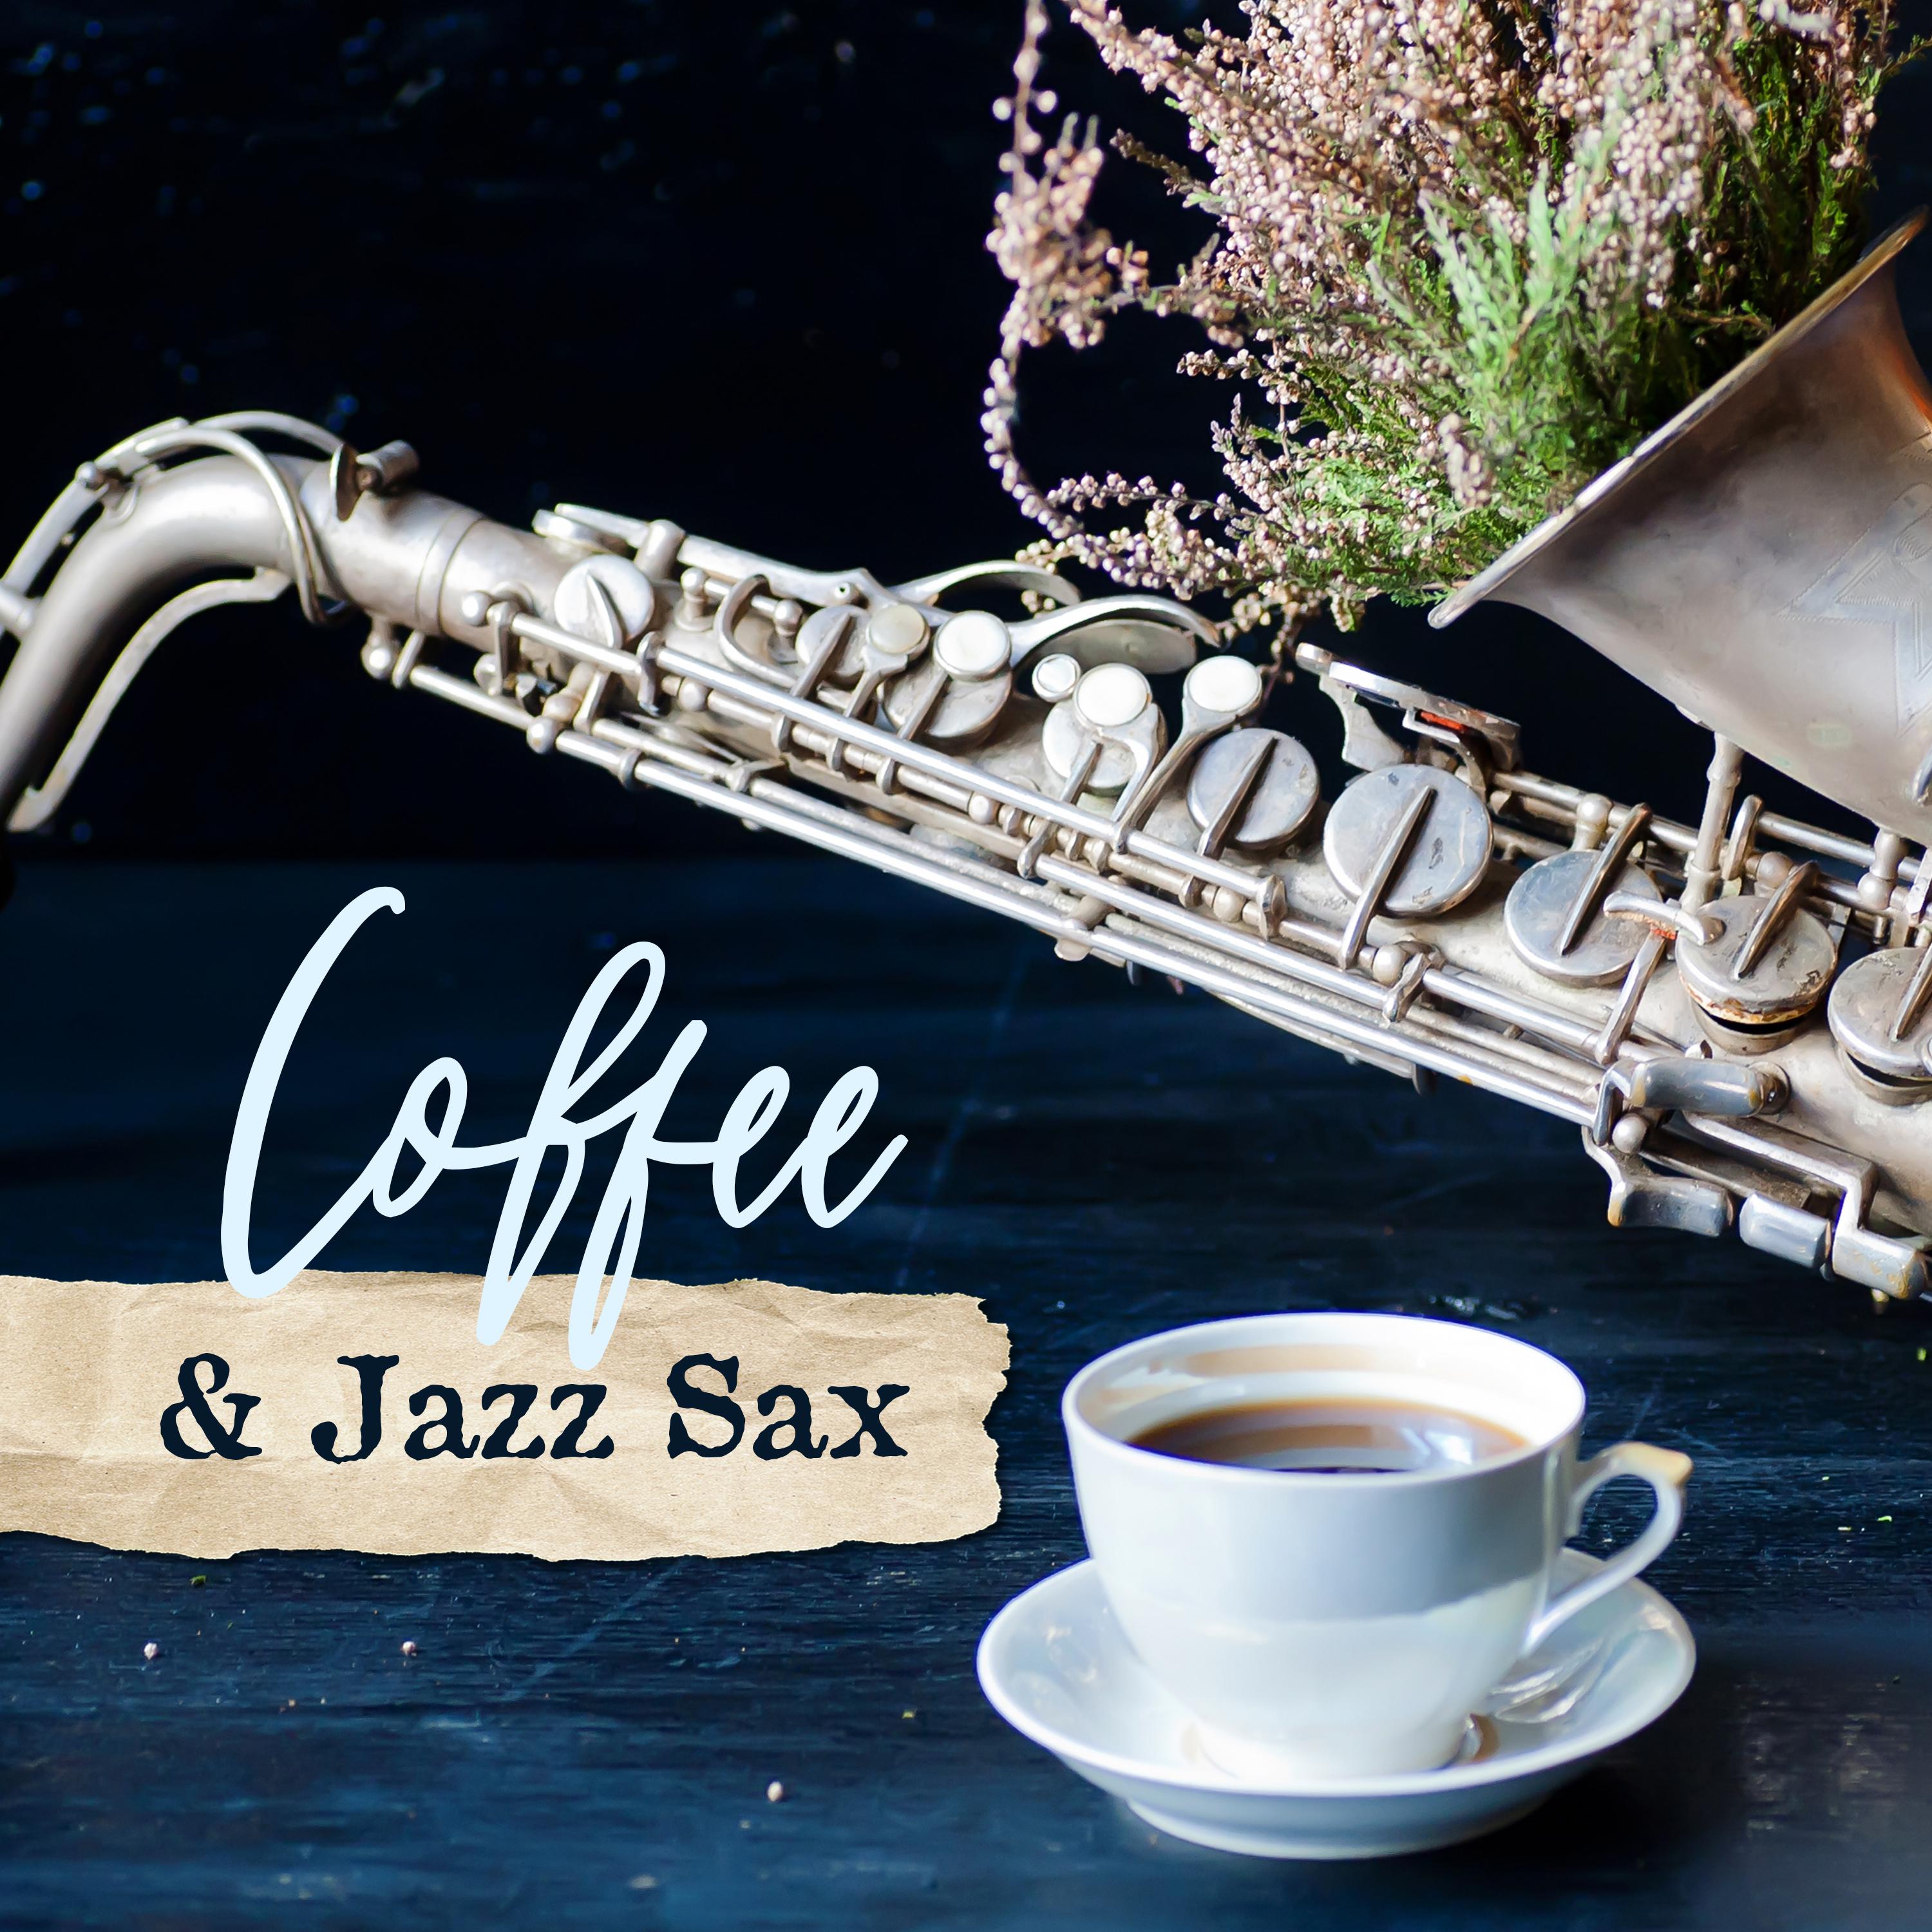 Coffee  Jazz Sax  Smooth Jazz 2019 Music Compilation, Background Melodies for Time Spending with Coffee  Friends, Magic Sounds of Sax, Piano  Others